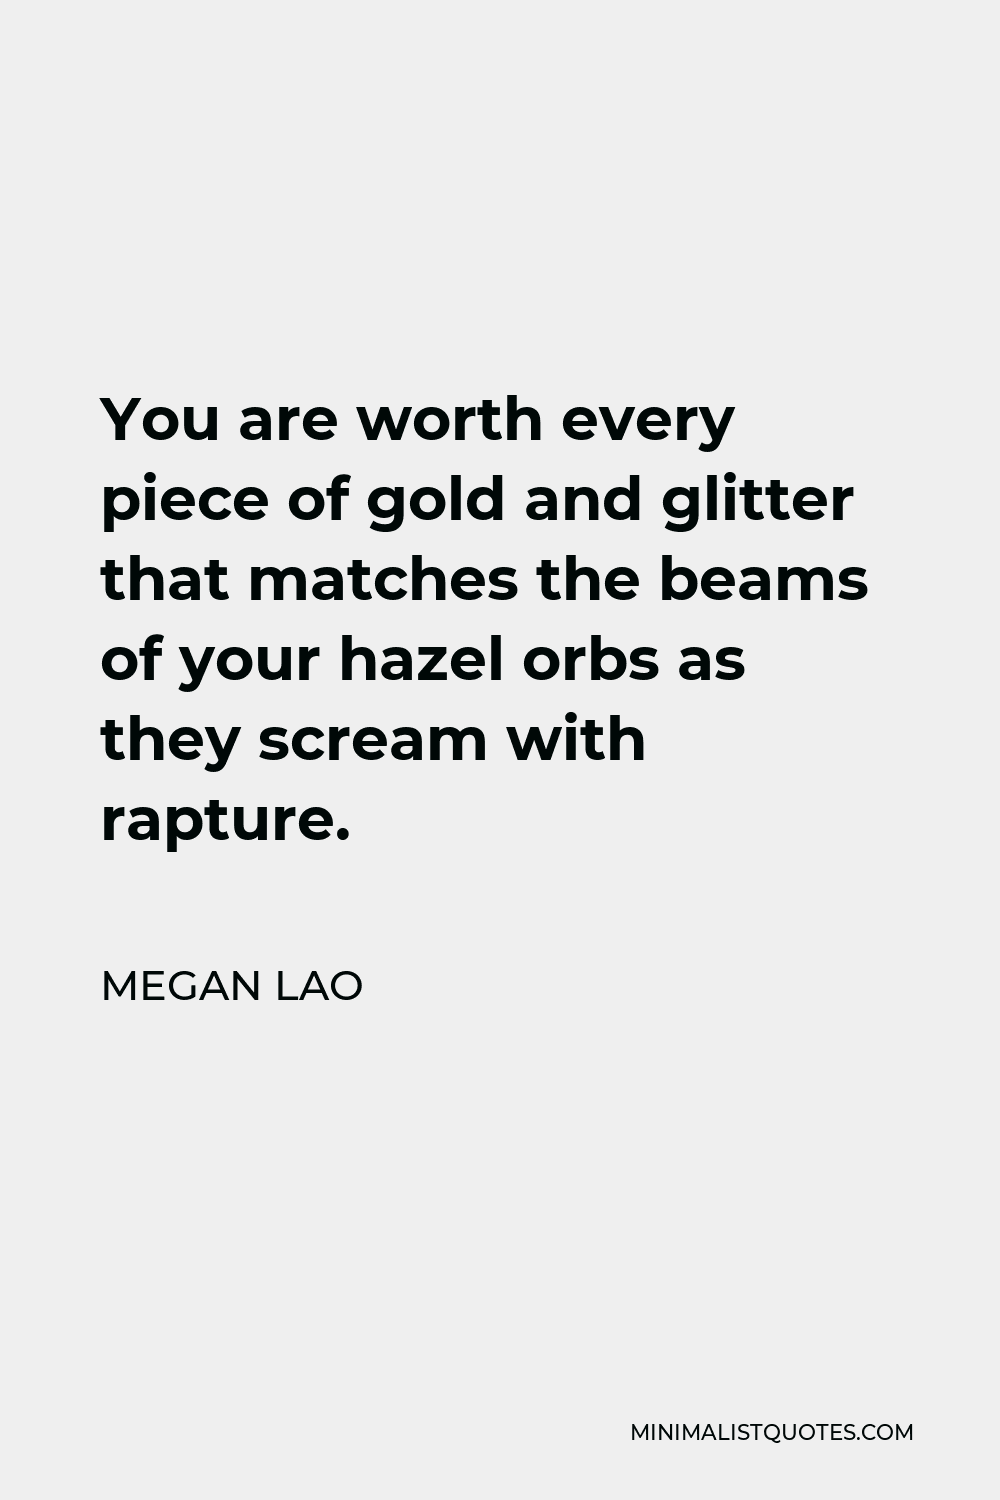 Megan Lao Quote - You are worth every piece of gold and glitter that matches the beams of your hazel orbs as they scream with rapture.